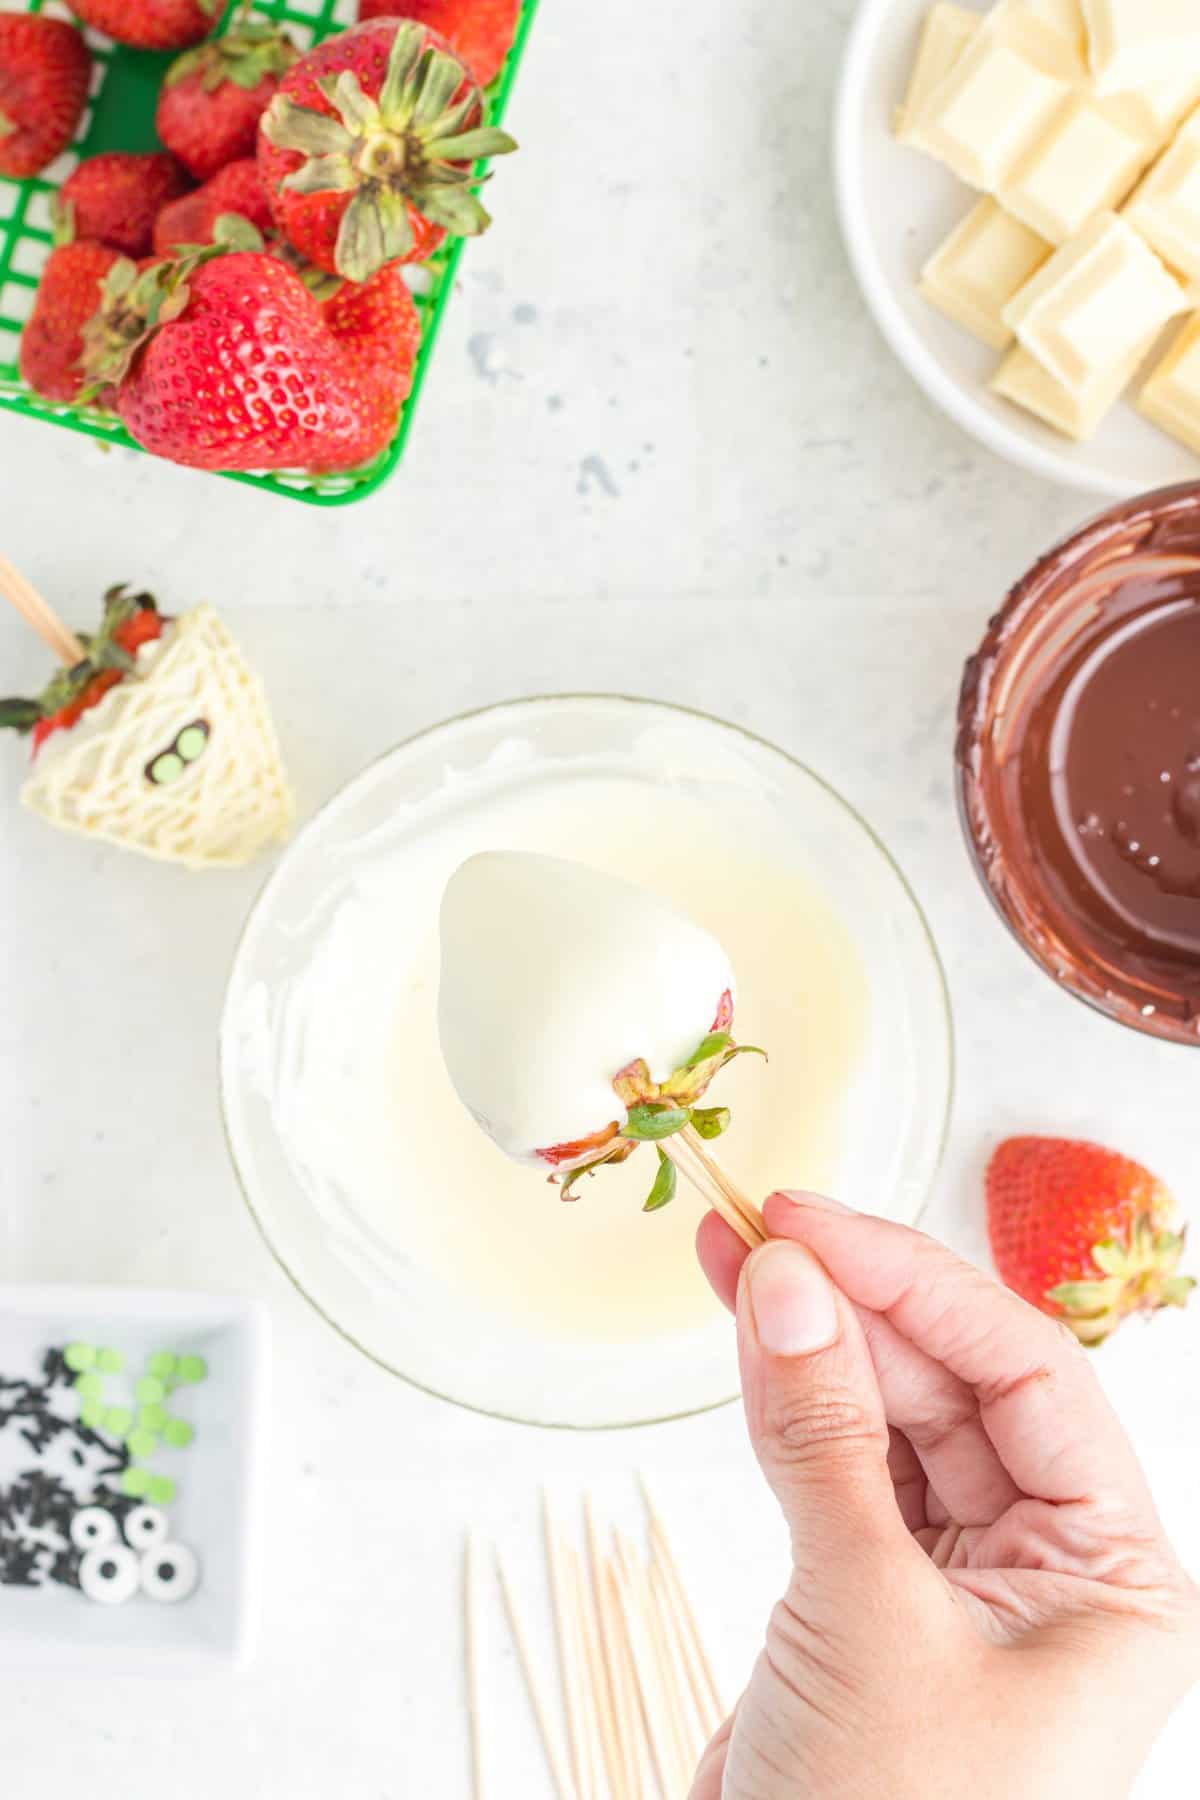 Hand dipping strawberry into a bowl of melted white chocolate. 